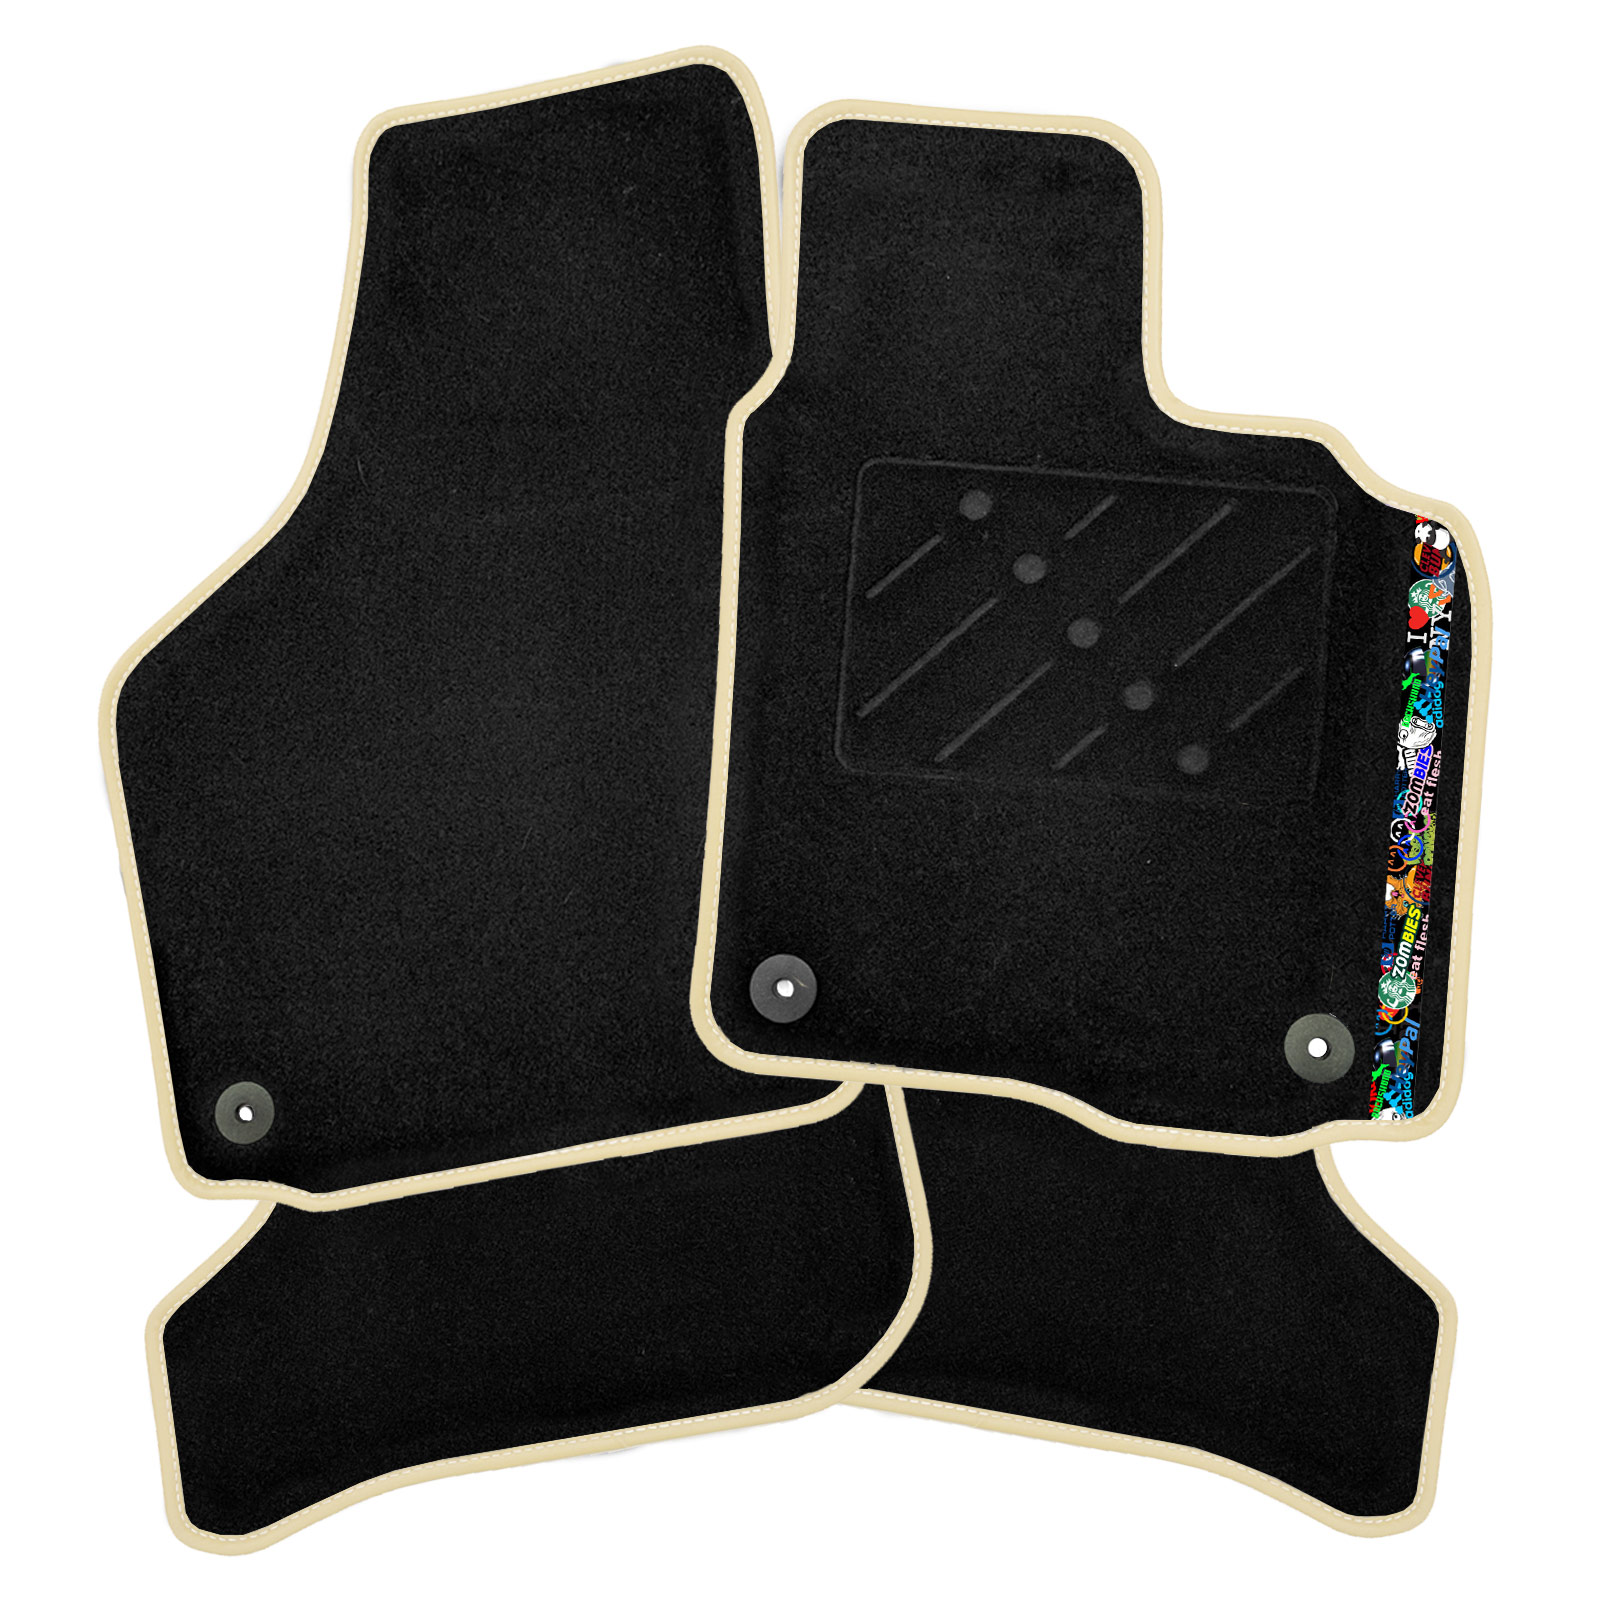 1998-2000 To Fit Fits For Nissan Almera Tailored Car Mats